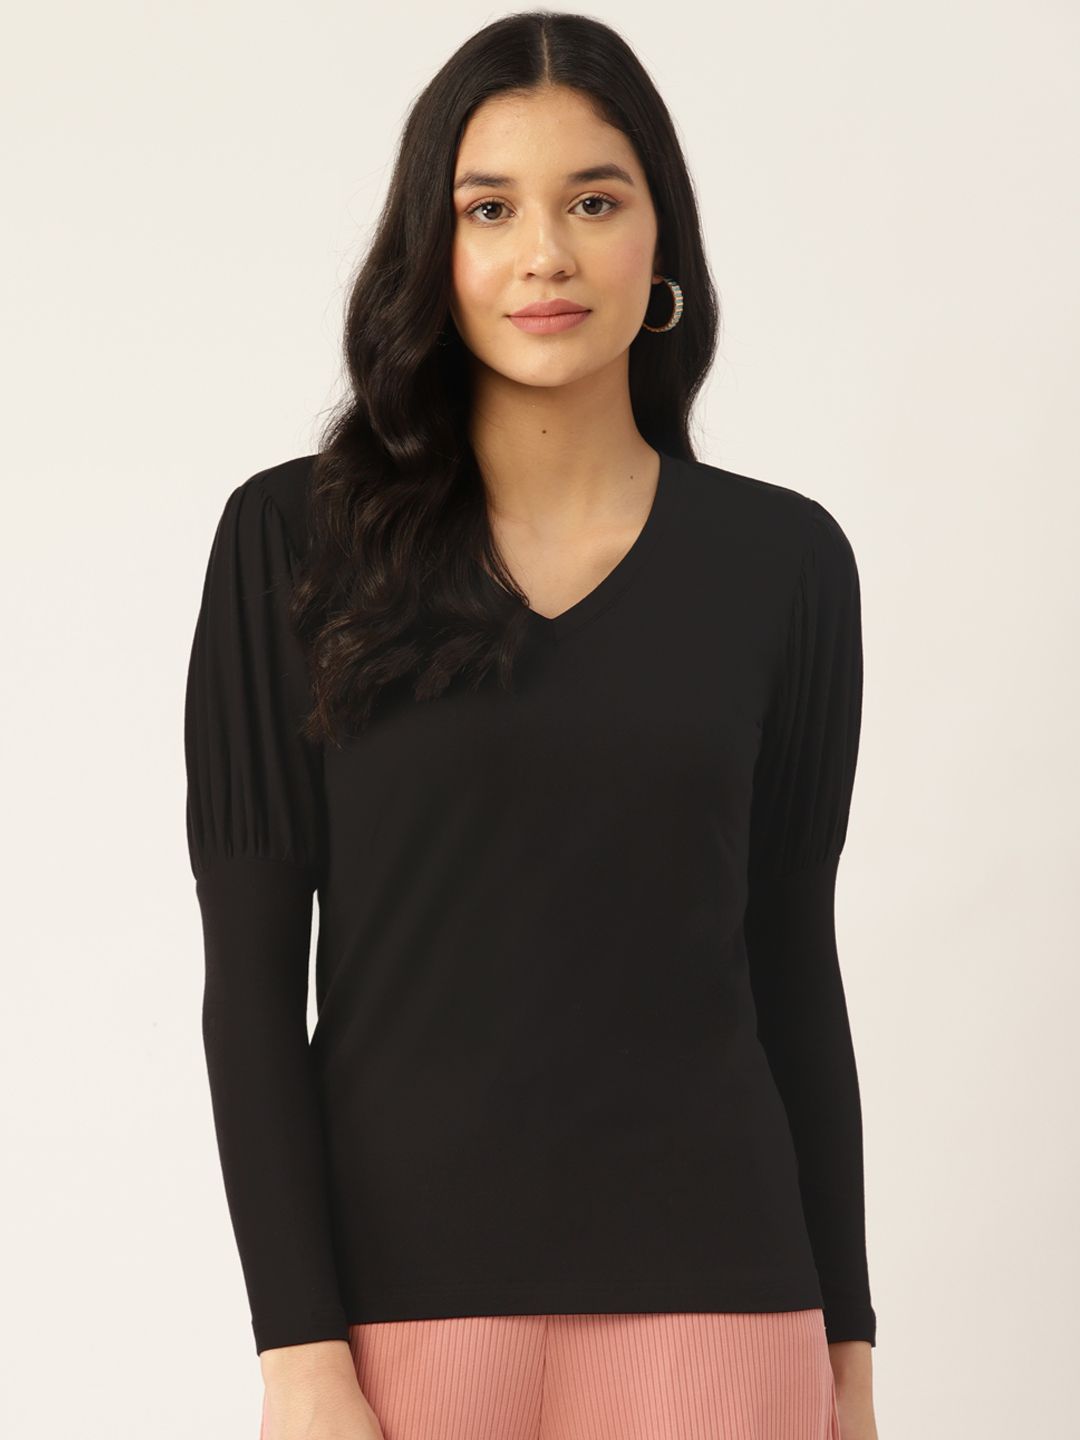 UNMADE Solid V-Neck Regular Top Price in India